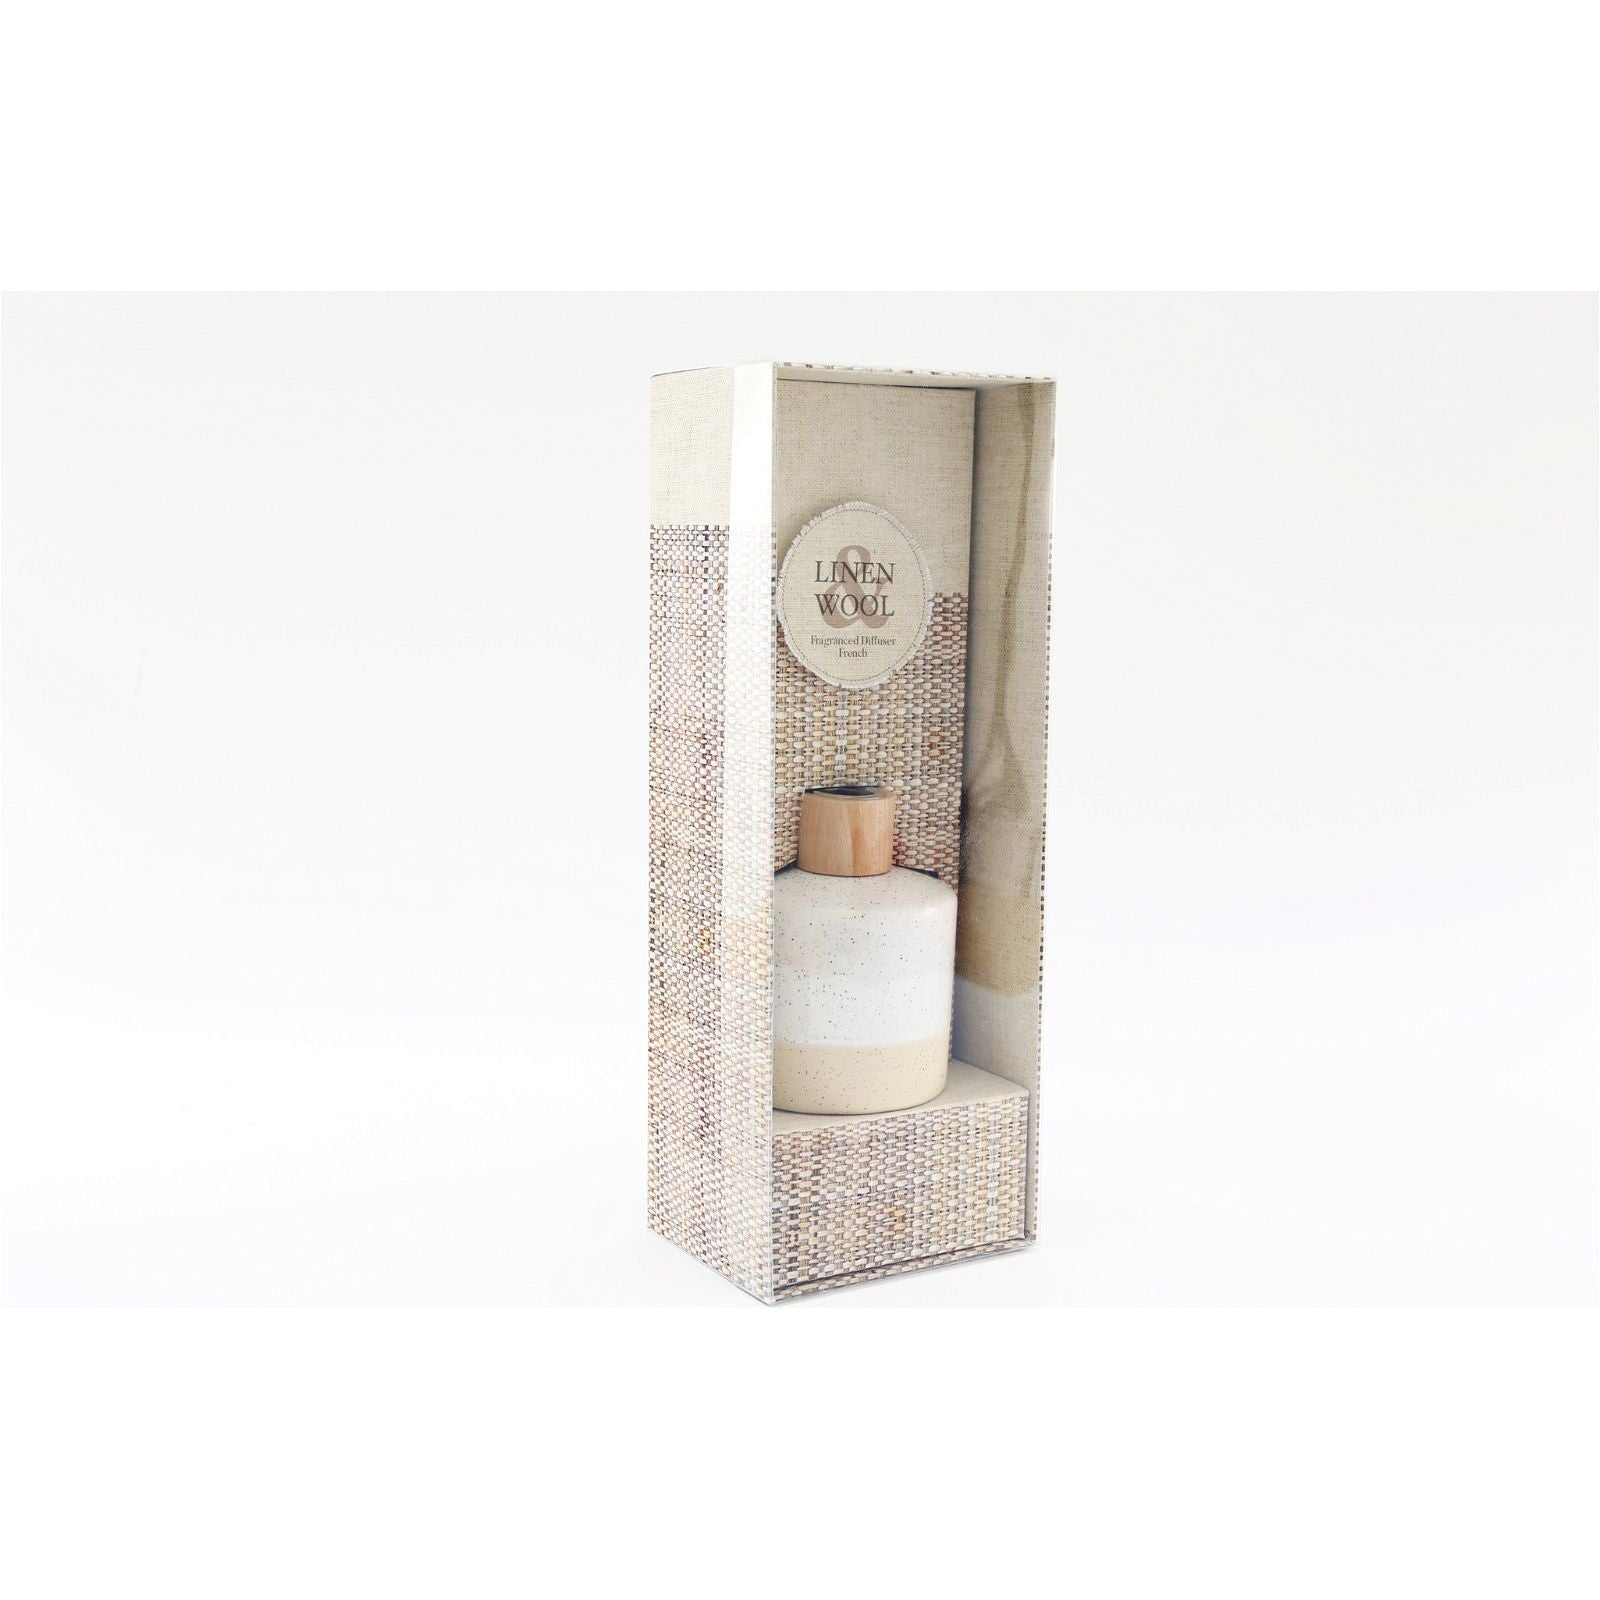 Ceramic Reed Diffuser Linen Wool - Ashton and Finch